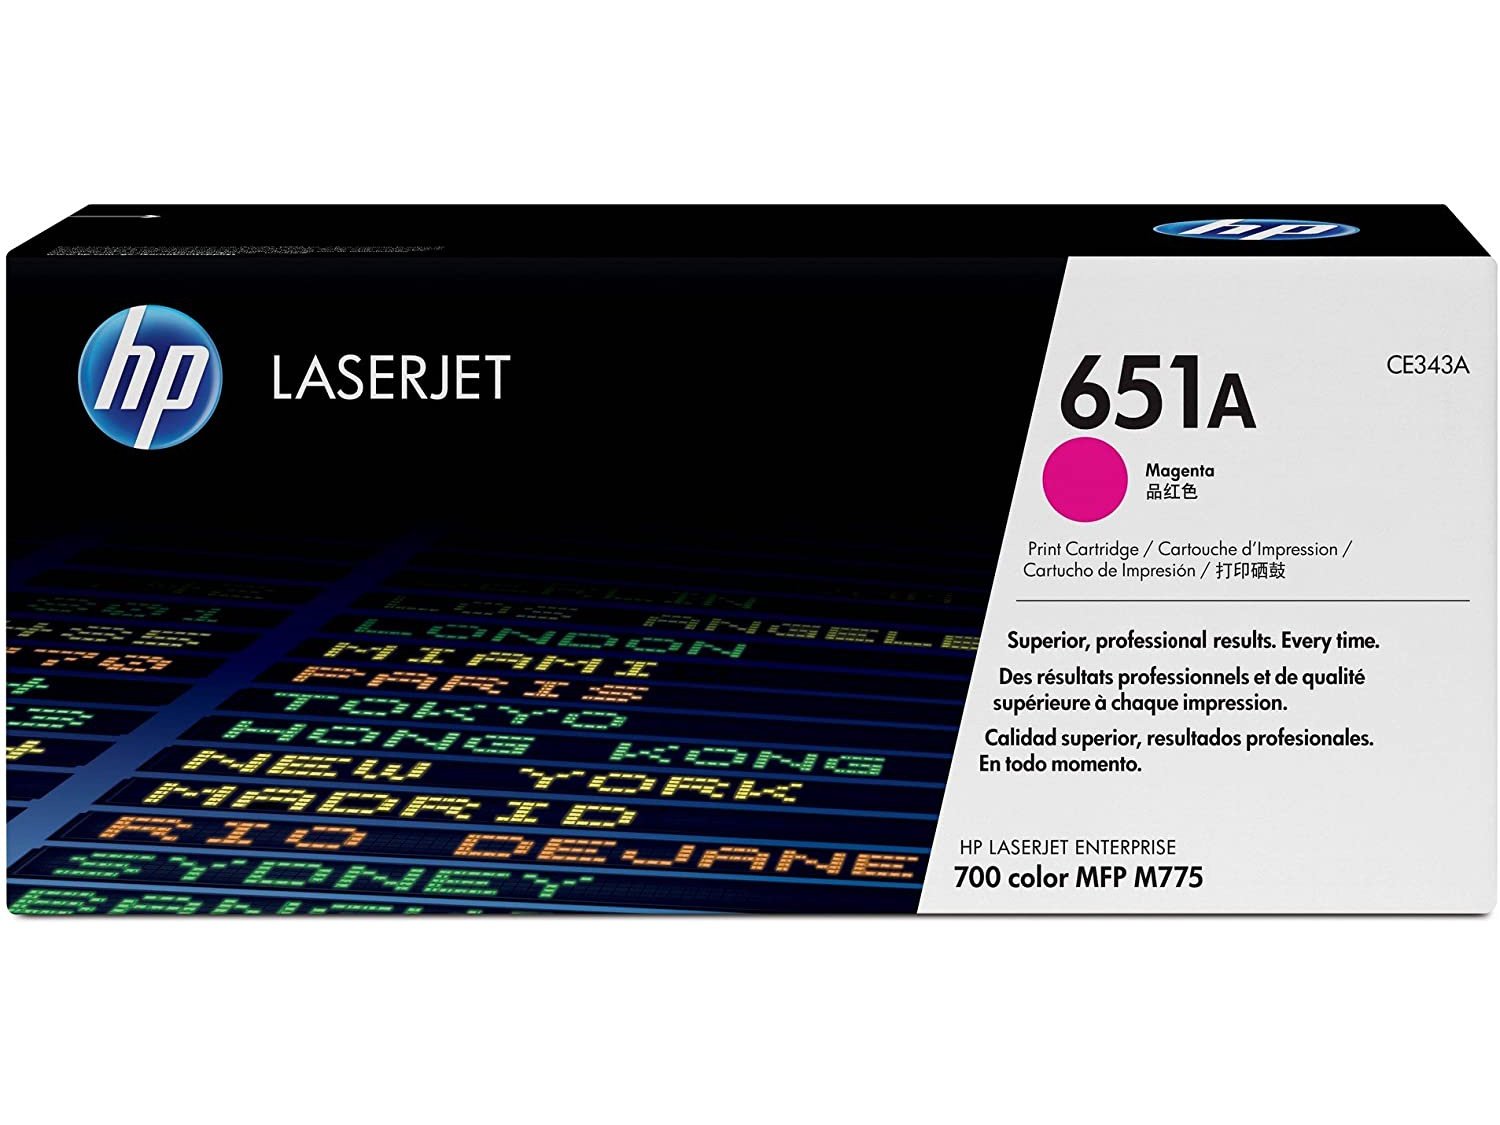 ICU Compatible/ OEM Get HP ICUCE343A Yields 16000 Pages 651A Magenta CE343A Laser Toner Cartridge - Ink Cartridges USA